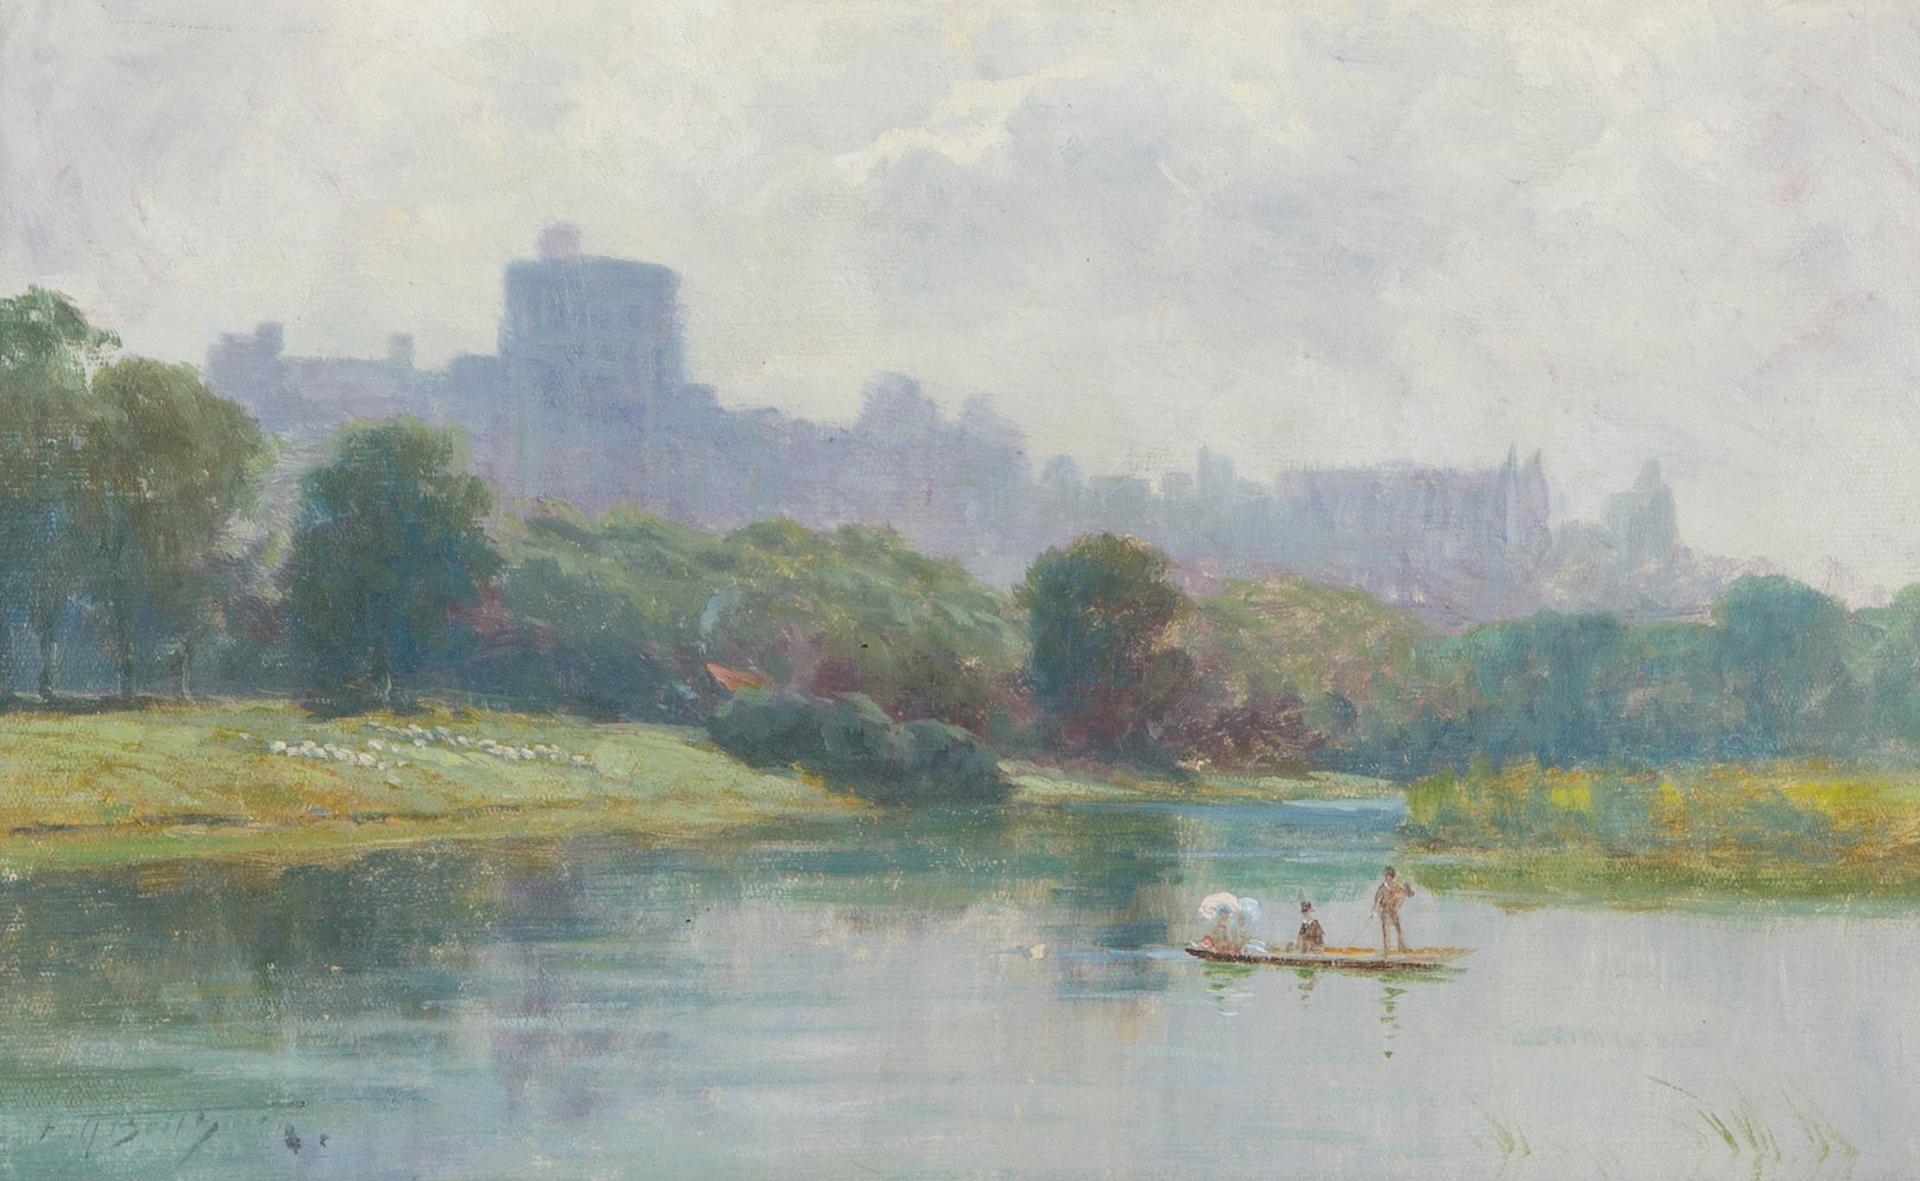 Frederic Martlett Bell-Smith (1846-1923) - Boating Along The Thames, Windsor Castle In The Distance